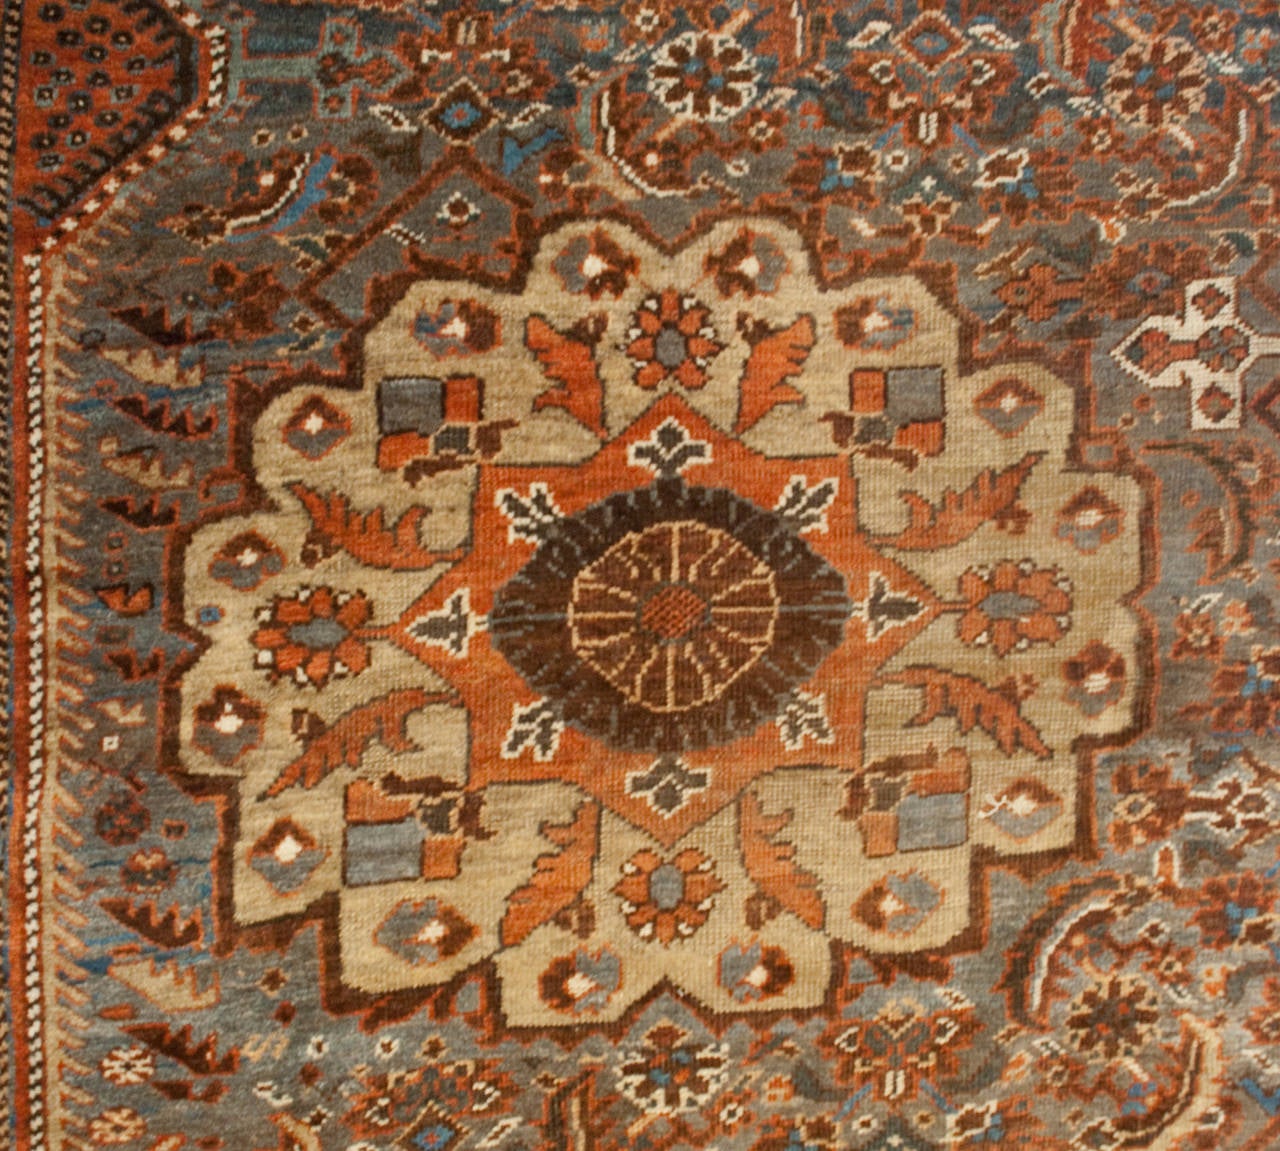 A late 19th century Persian Gashgai rug with an unbelievably dense field of flowers with multiple floral medallions surrounded by multiple floral borders.